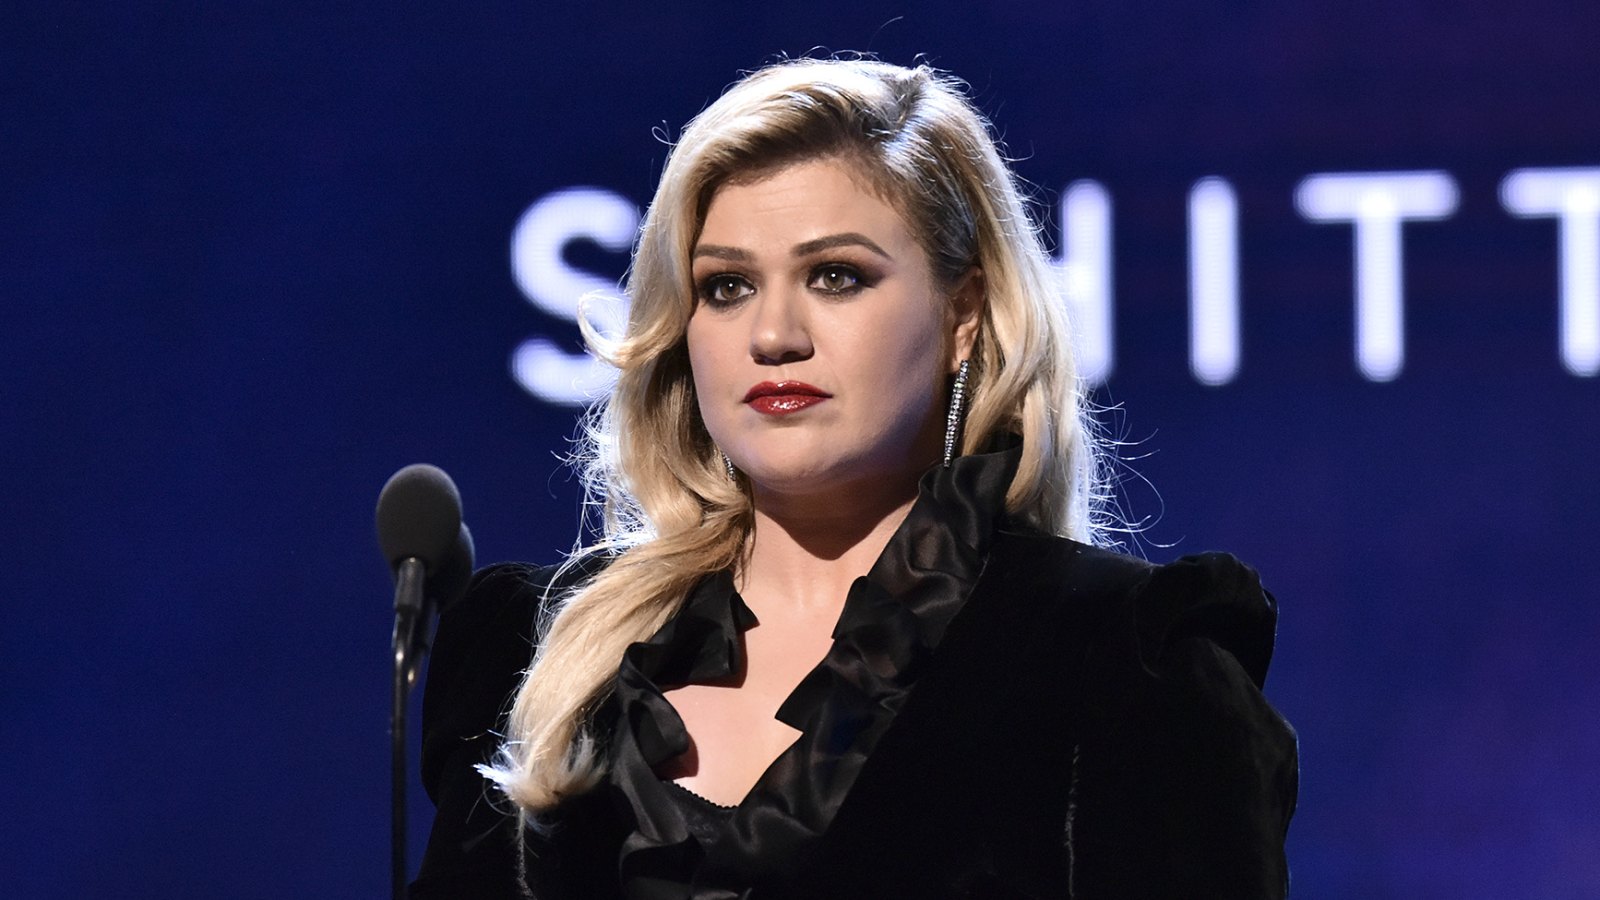 Kelly Clarkson Reacts to Toxic Talk Show Claims: 'Committed to Maintaining a Safe and Healthy' Space